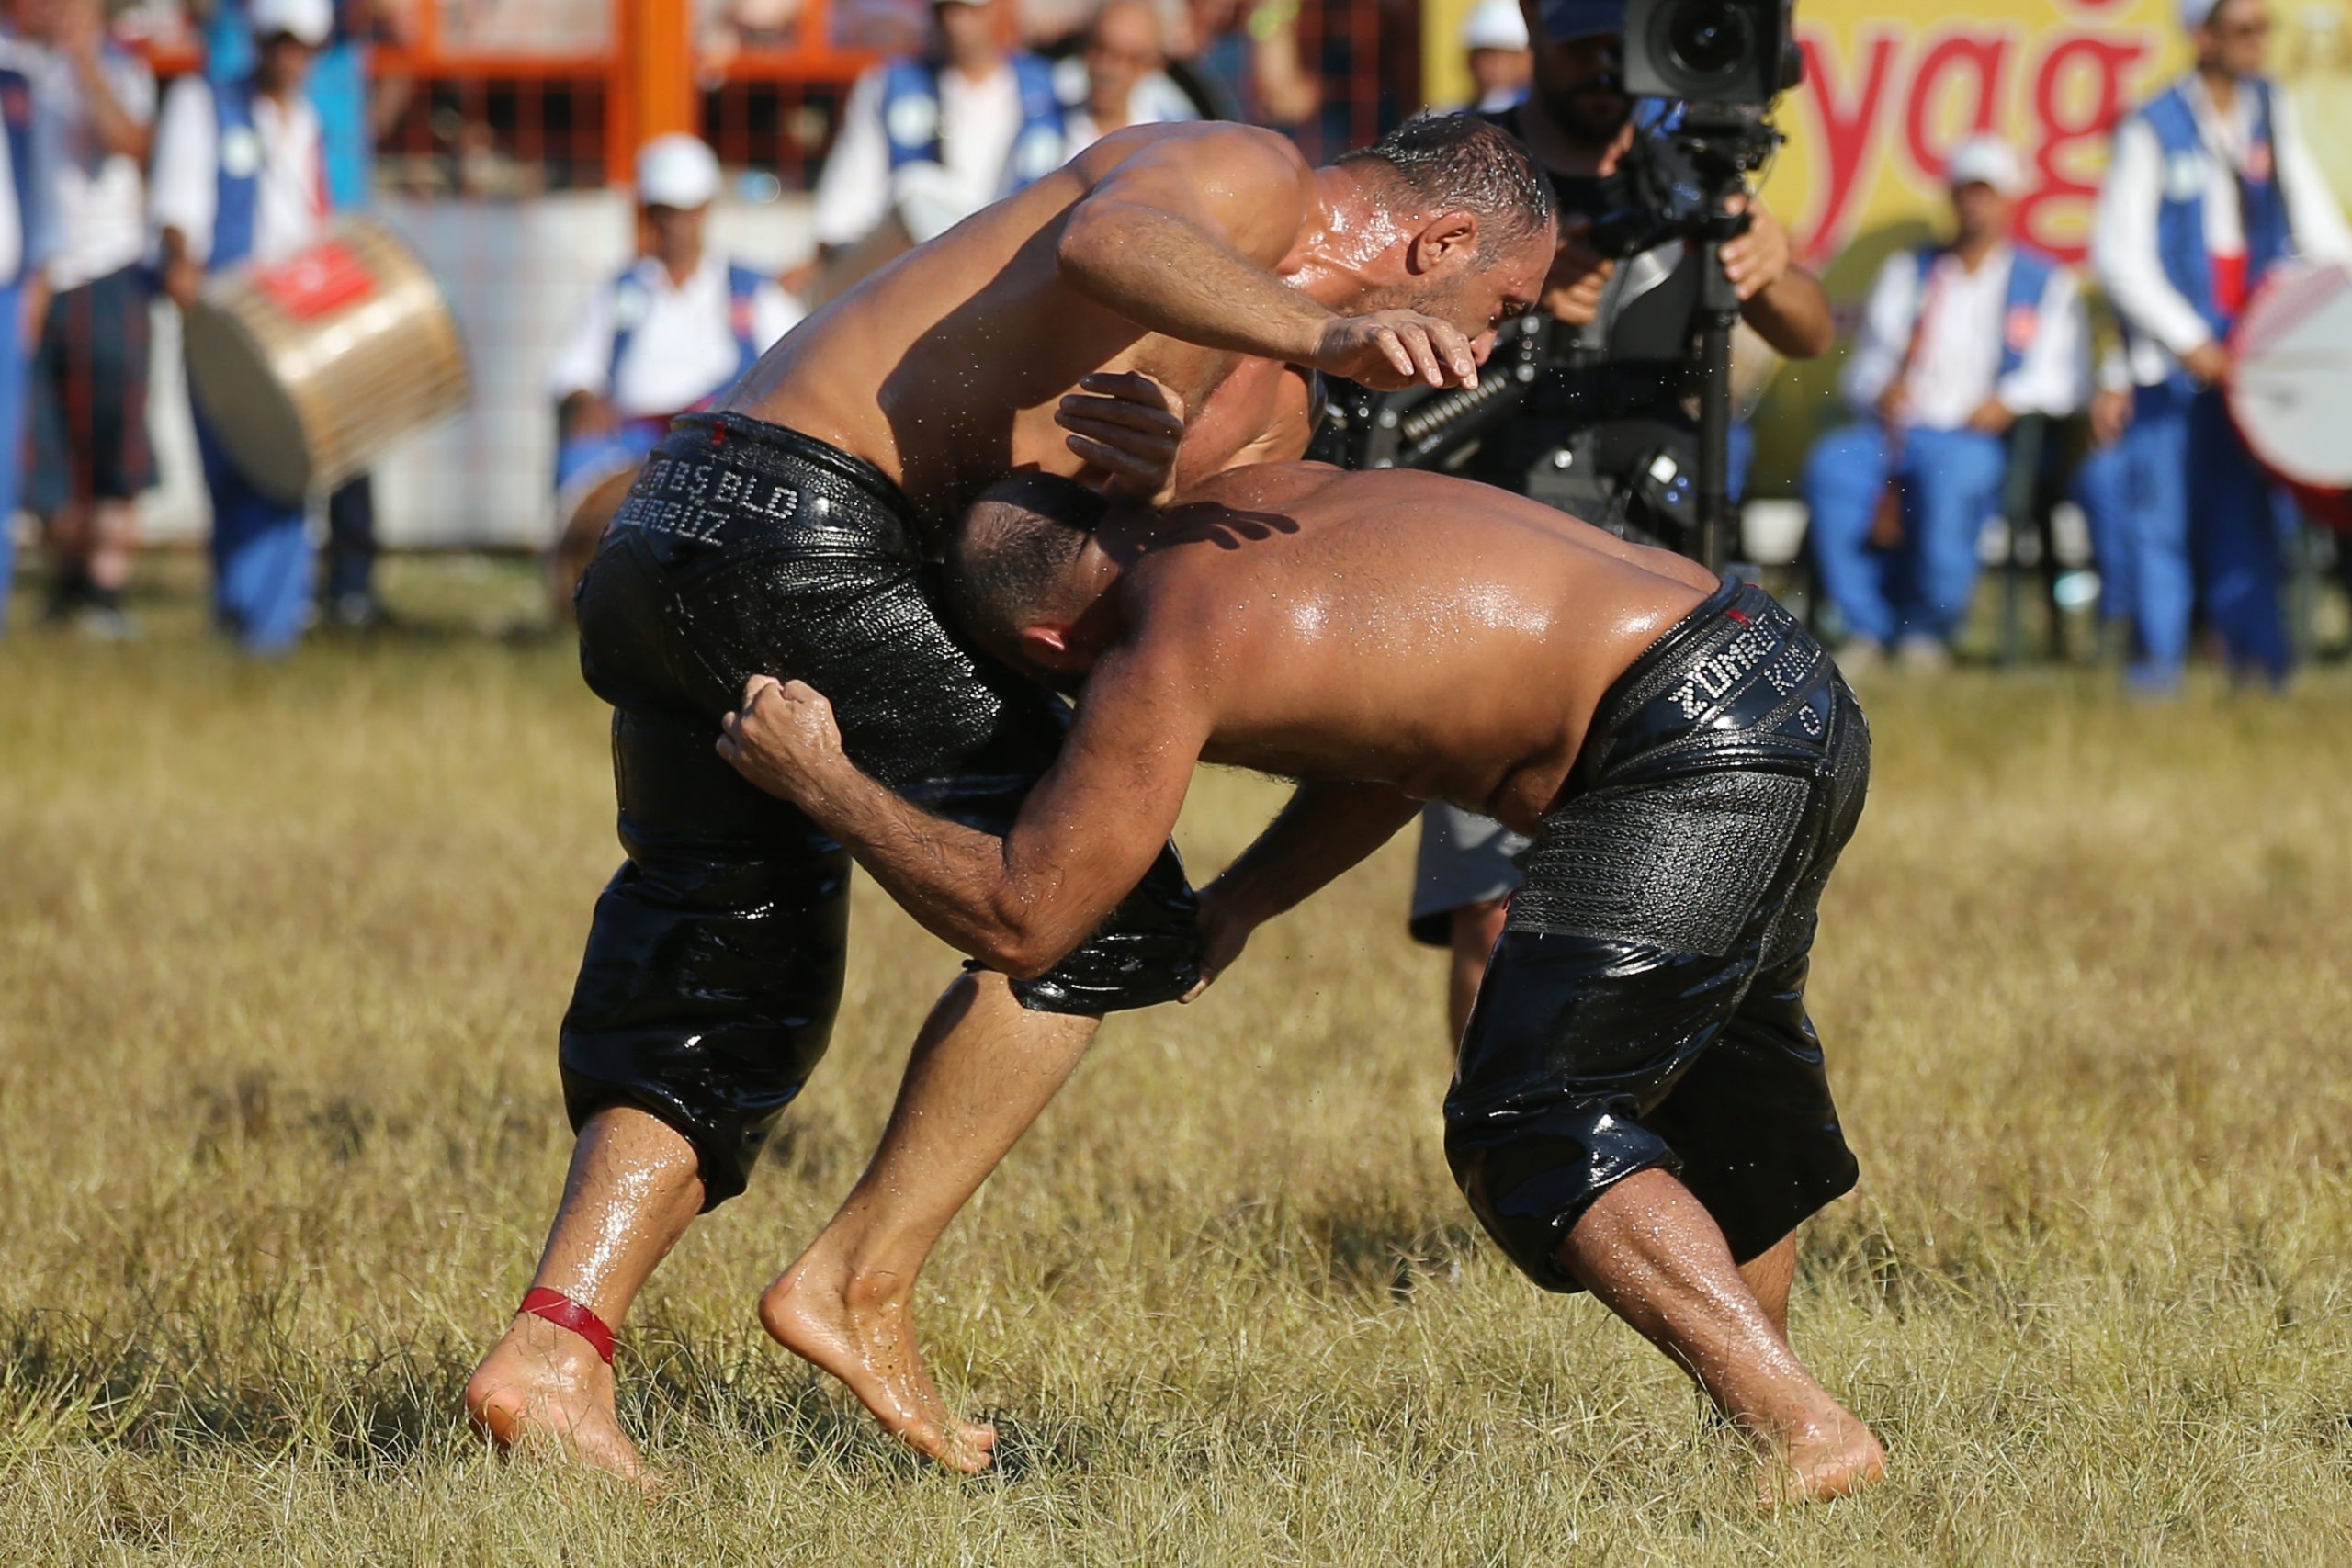 Wrestling: Oil Wrestling, Grease Wrestling, A traditional Turkish sport, Participants wrestle while covered in oil. 2560x1710 HD Wallpaper.